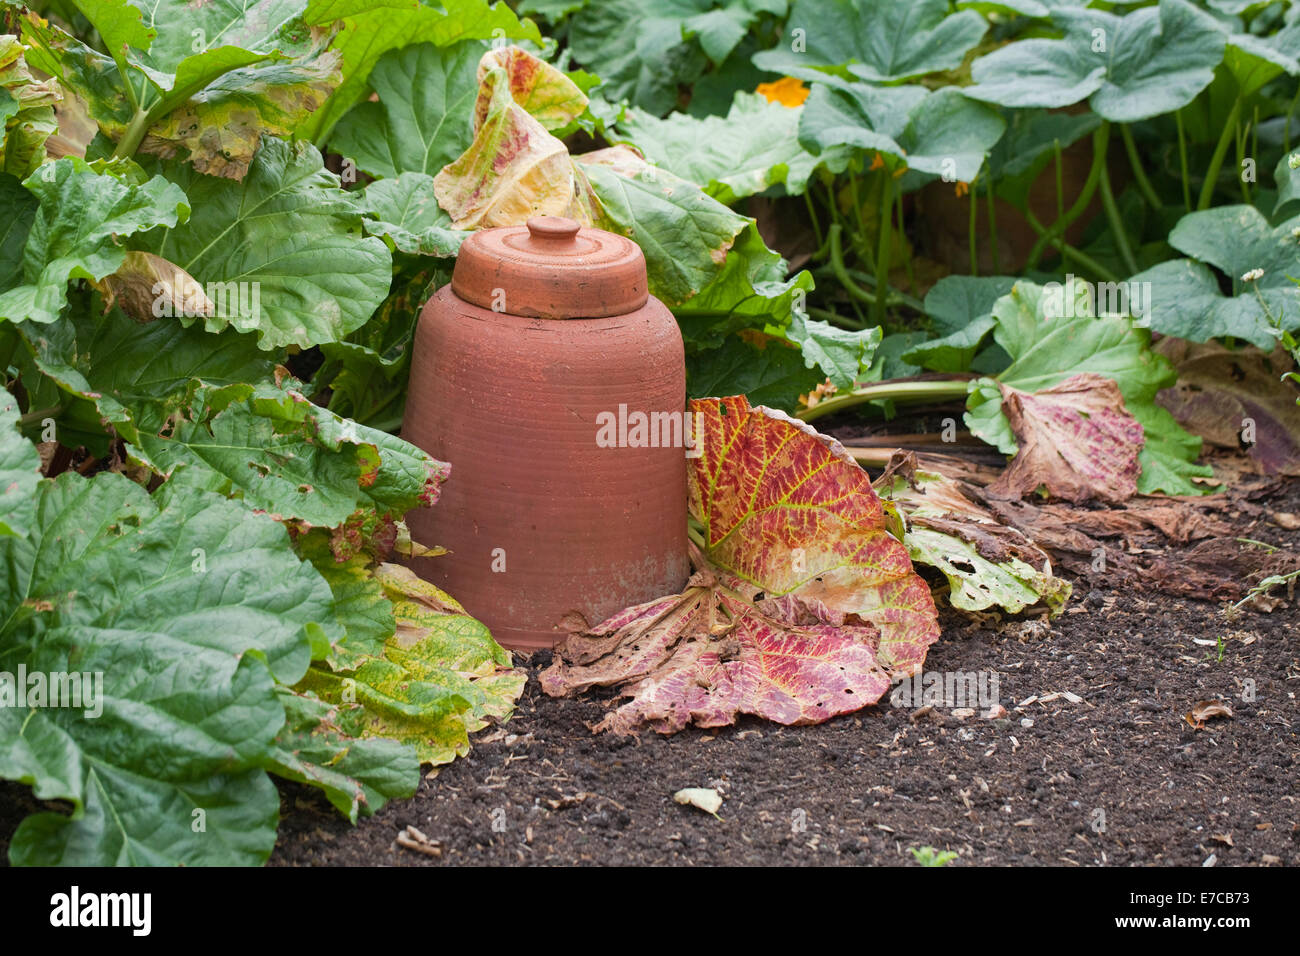 Rhubarb (Rheum rhaponticum). Ceramic, or fired clay pot especially made to cover a plant, thus depriving of light. Stock Photo